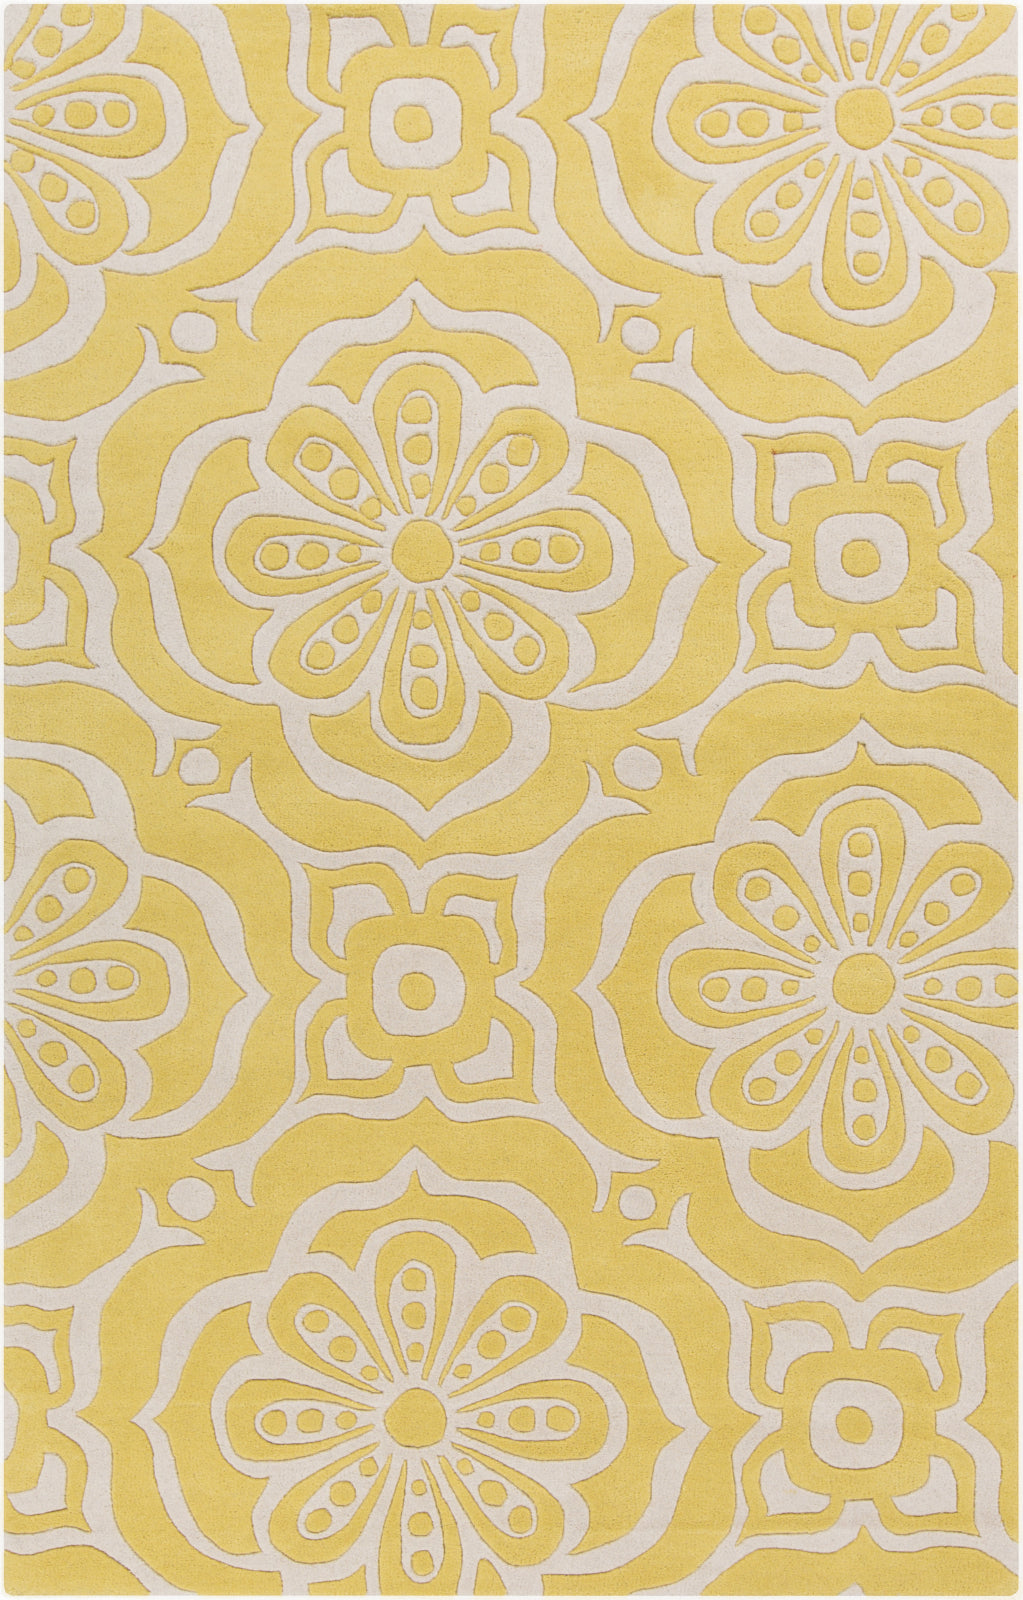 Surya Alhambra ALH-5005 Area Rug by Kate Spain main image